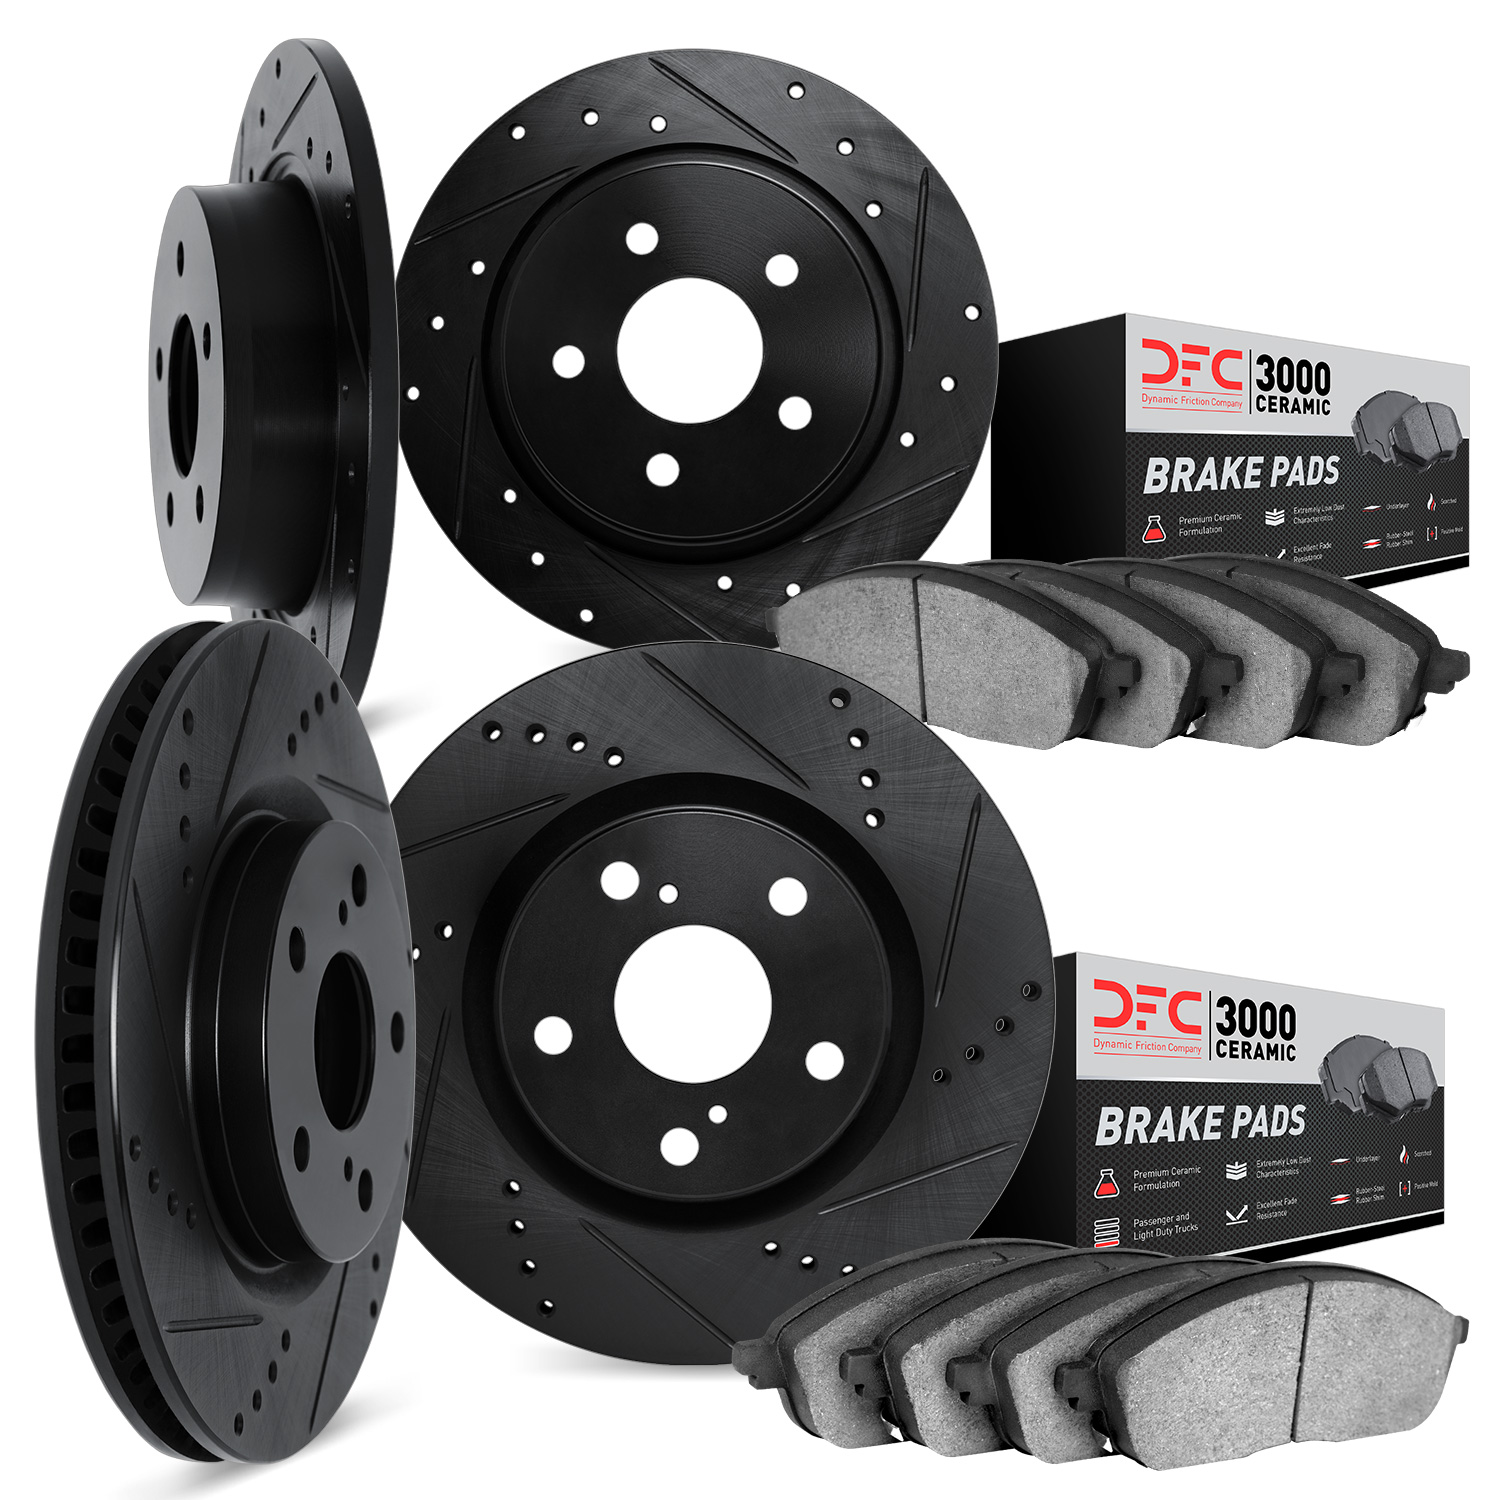 8304-13023 Drilled/Slotted Brake Rotors with 3000-Series Ceramic Brake Pads Kit [Black], 2003-2008 GM, Position: Front and Rear